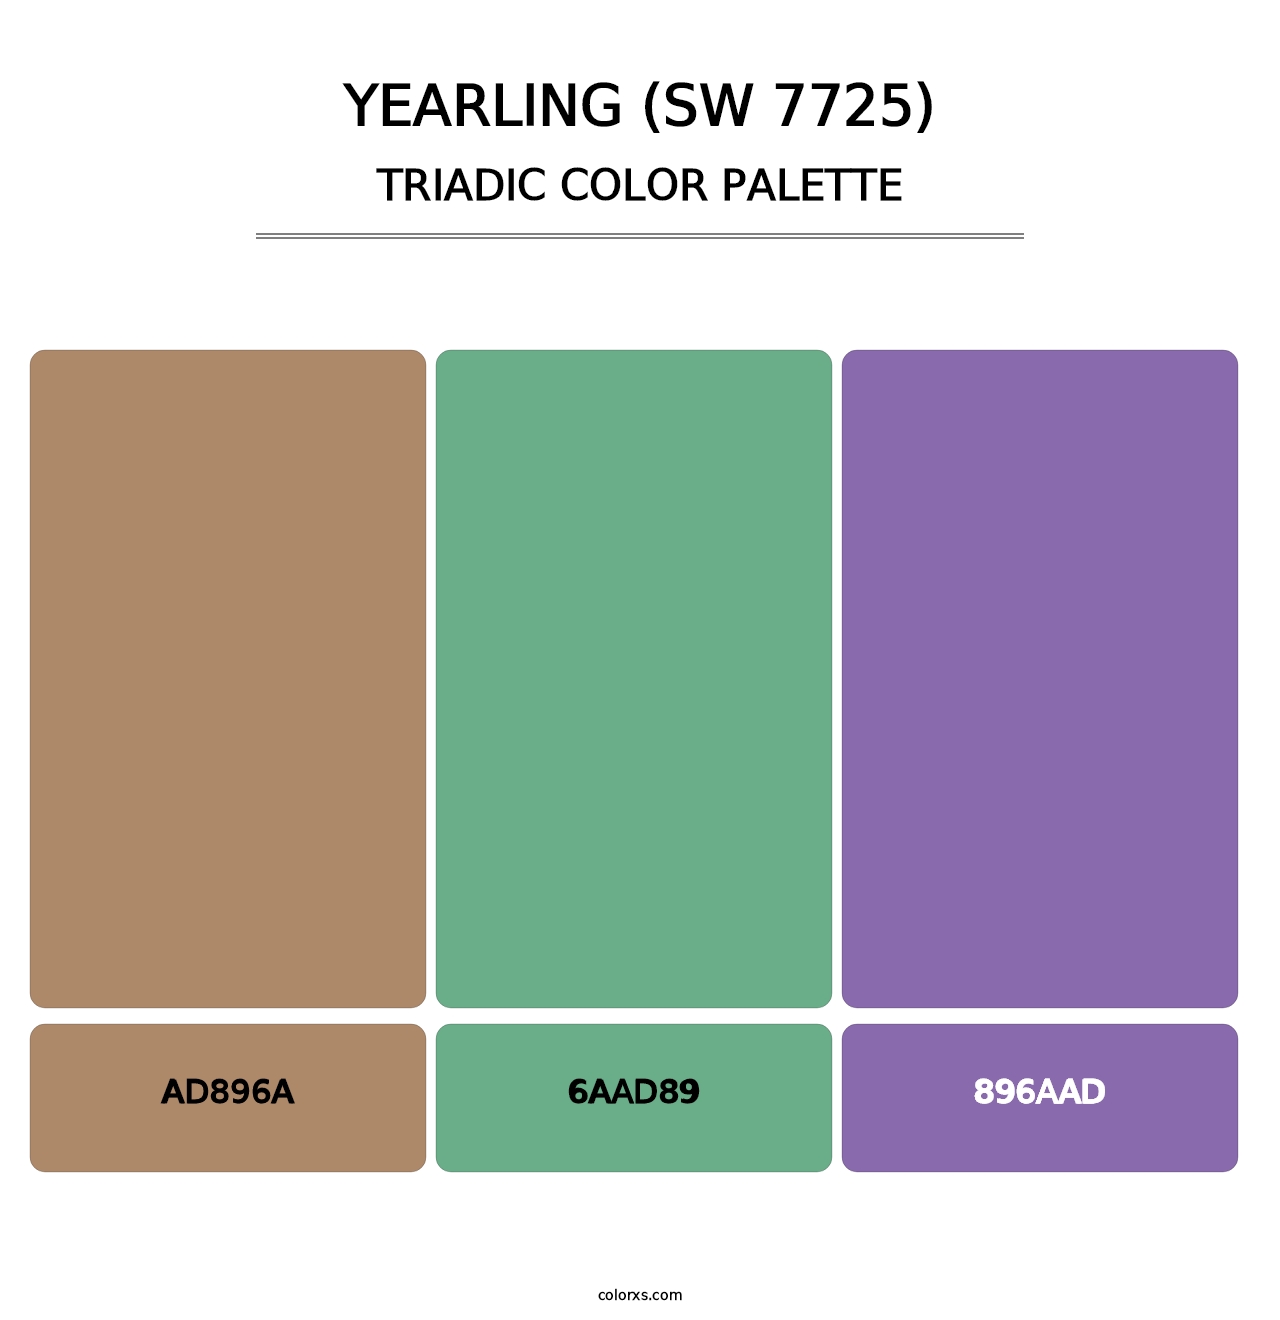 Yearling (SW 7725) - Triadic Color Palette